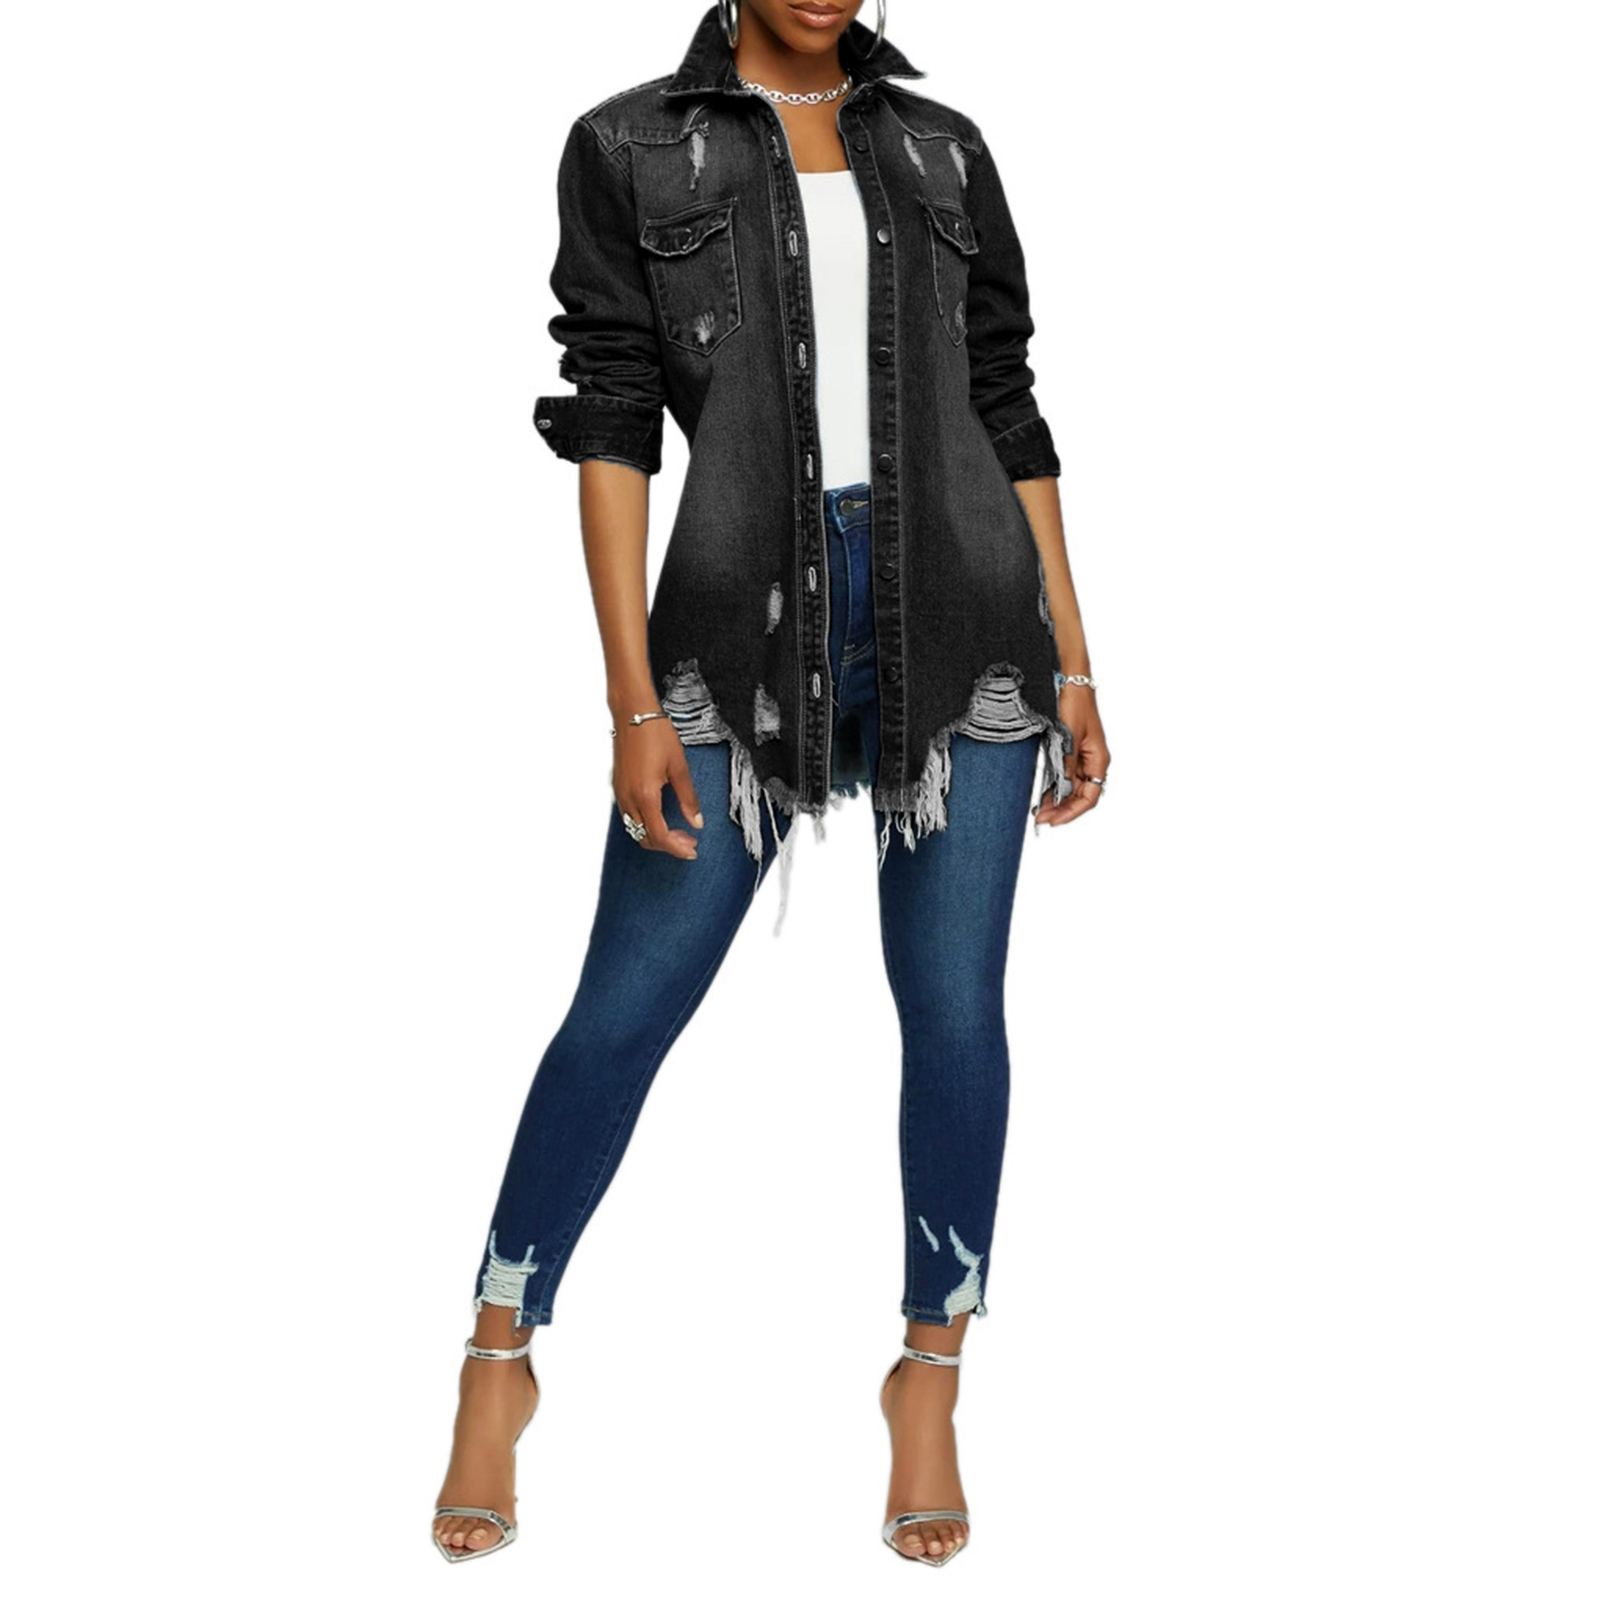 Ma&Baby Women Denim Jacket Long Sleeve Lapel Button Down Ripped Jeans Jacket Coat Plus Size - image 2 of 4